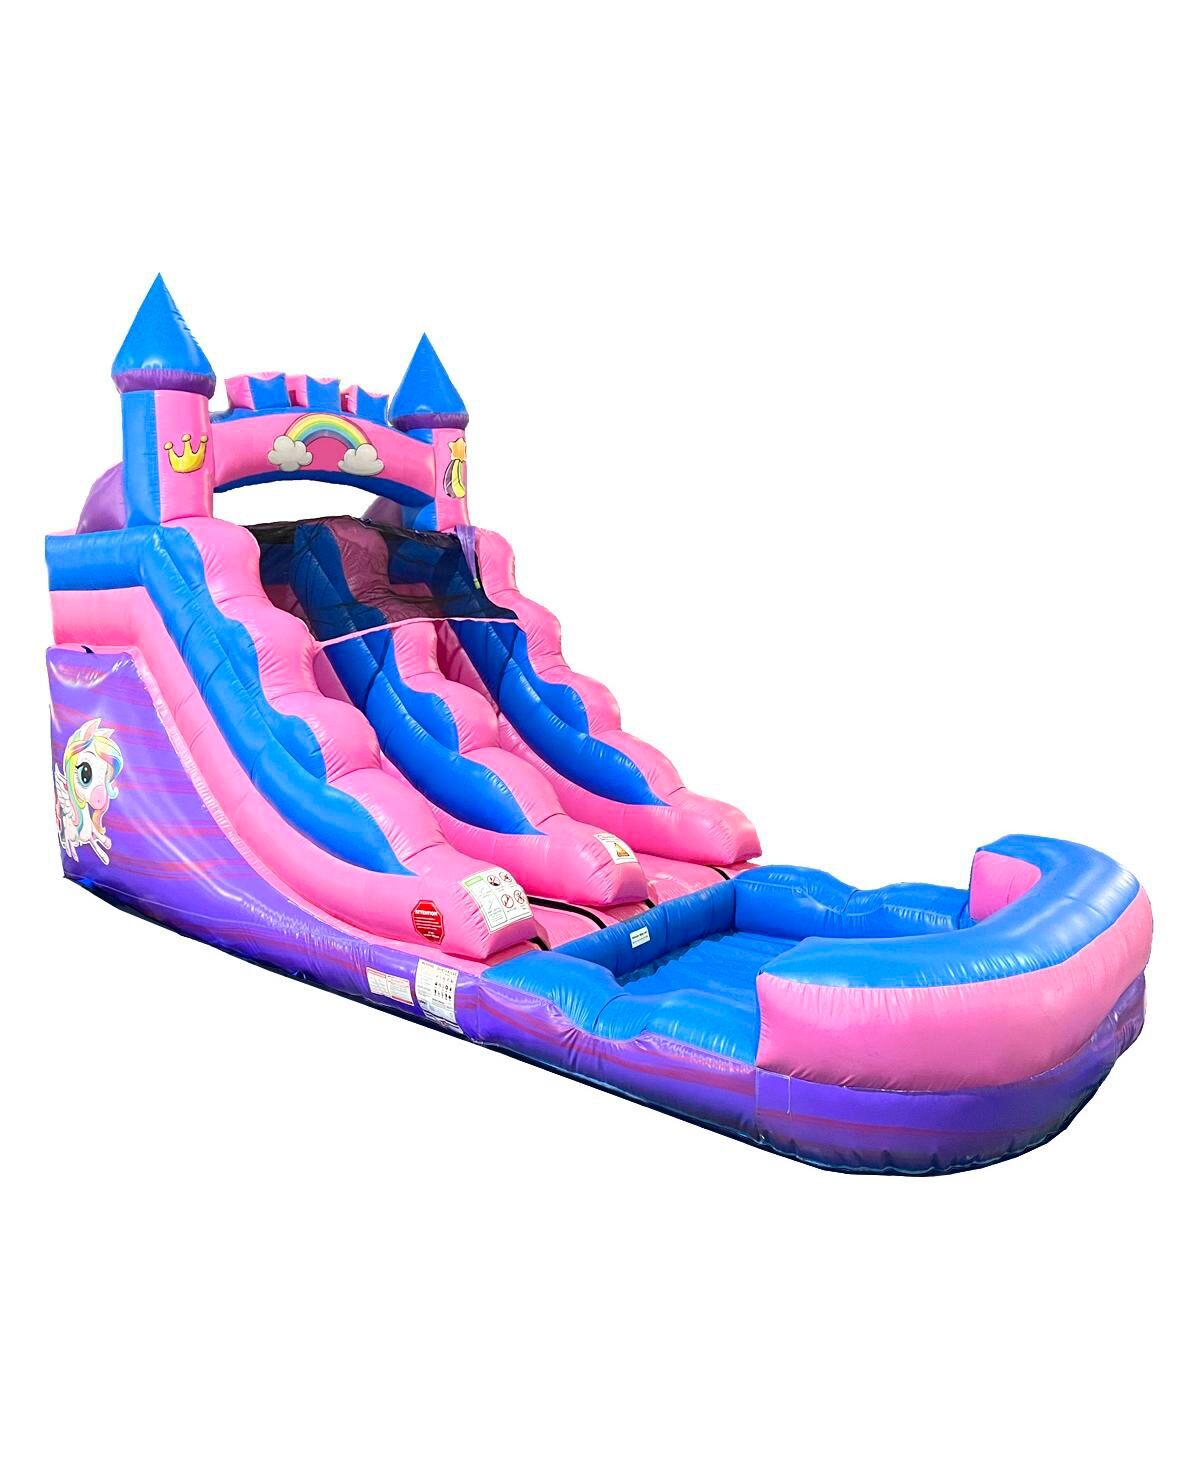 Pogo Bounce House Inflatable Water Slide for Kids (Without Blower) - 21' x 9' x 12' Foot Backyard Inflatable Slide for Summer Fun - Slide with Water P